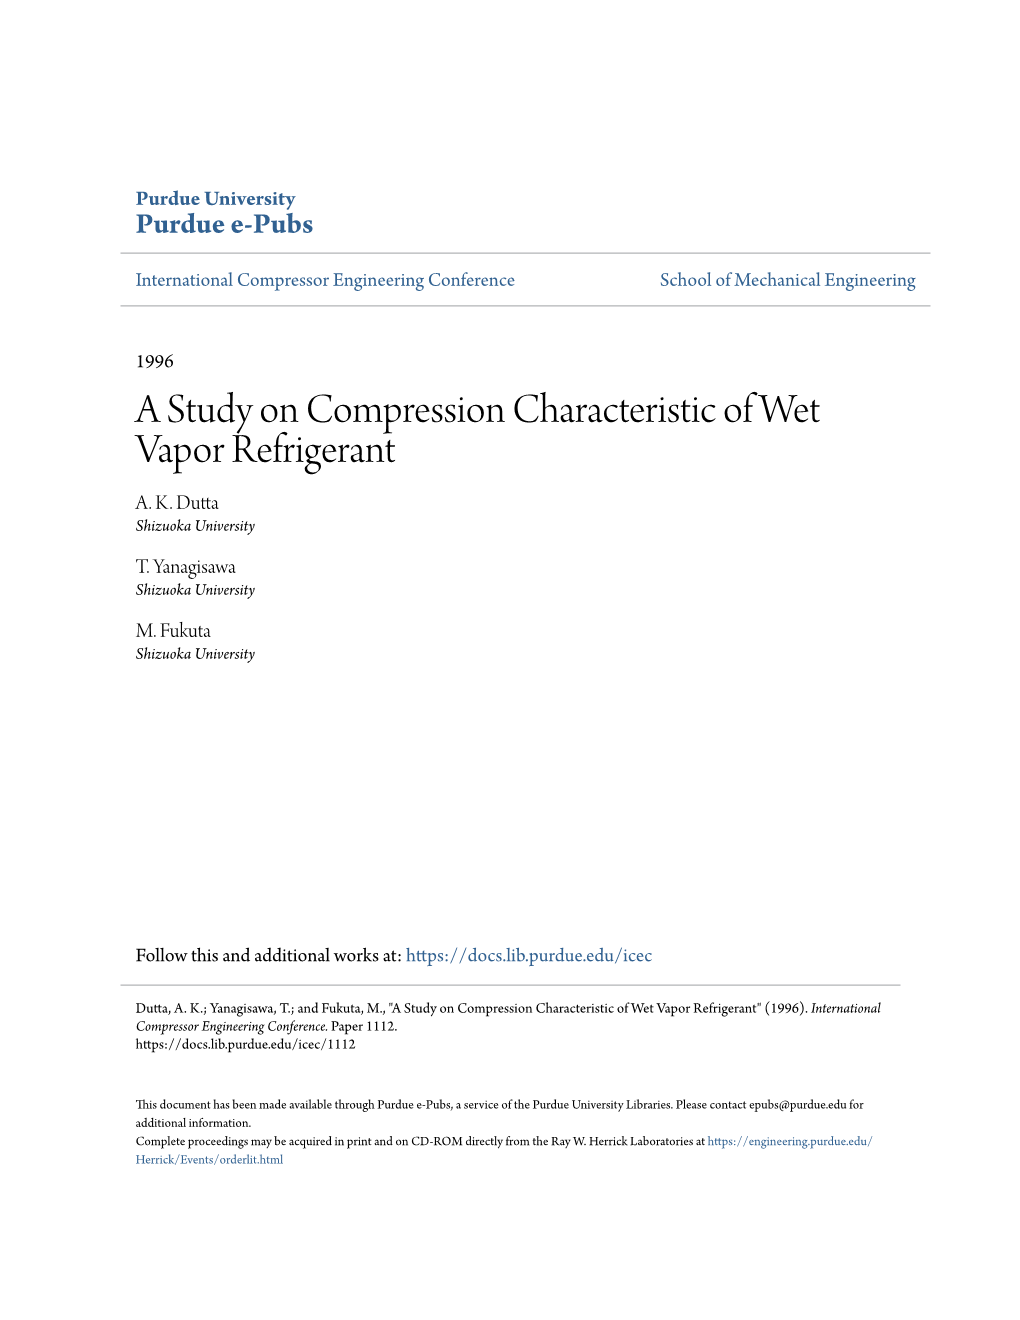 A Study on Compression Characteristic of Wet Vapor Refrigerant A